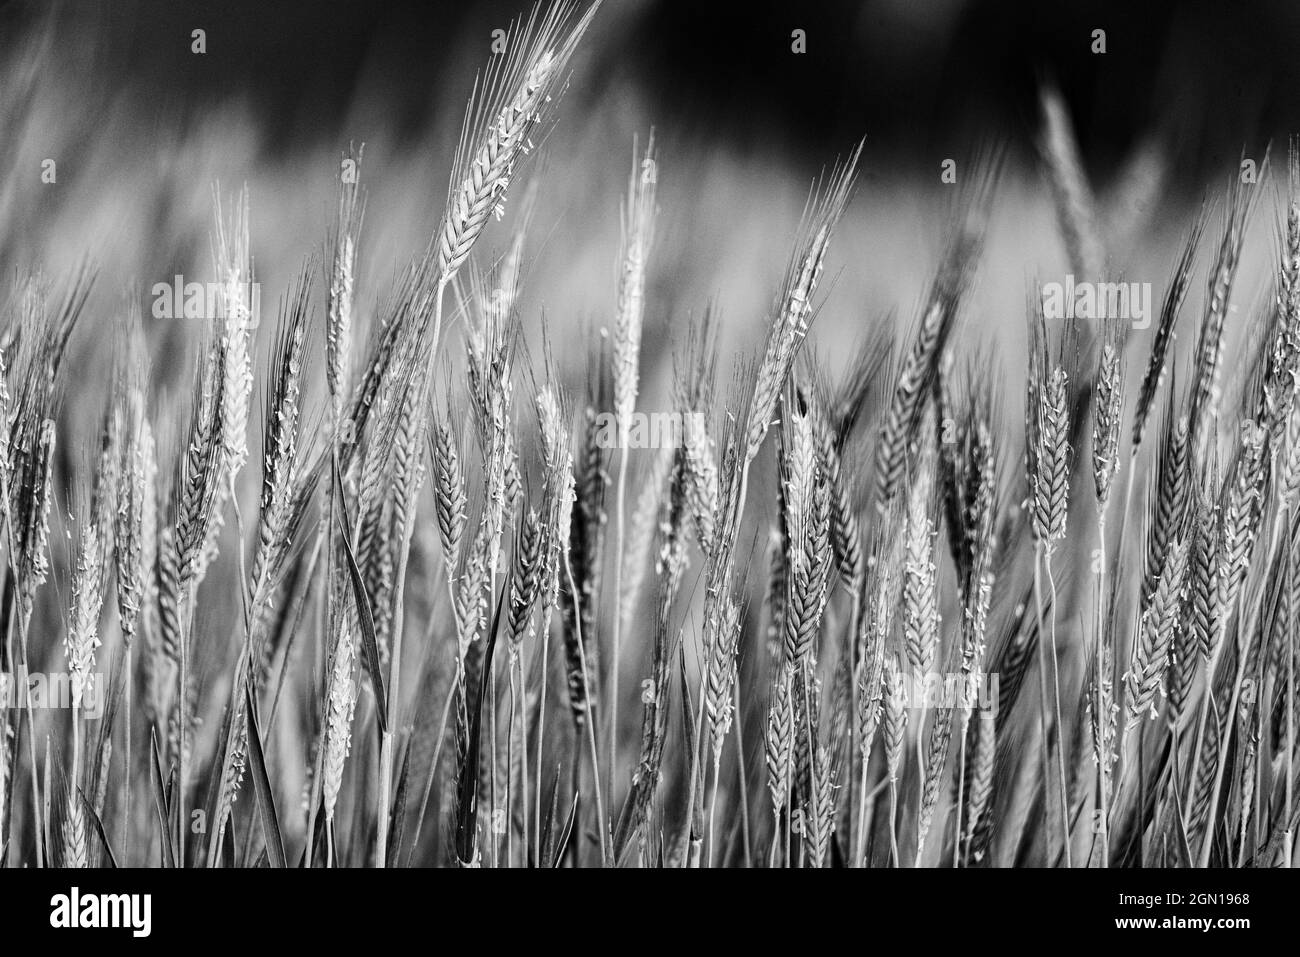 Barley during pollination. Cereal ripening in the field. Close up view of ears of grain with grain. Stock Photo